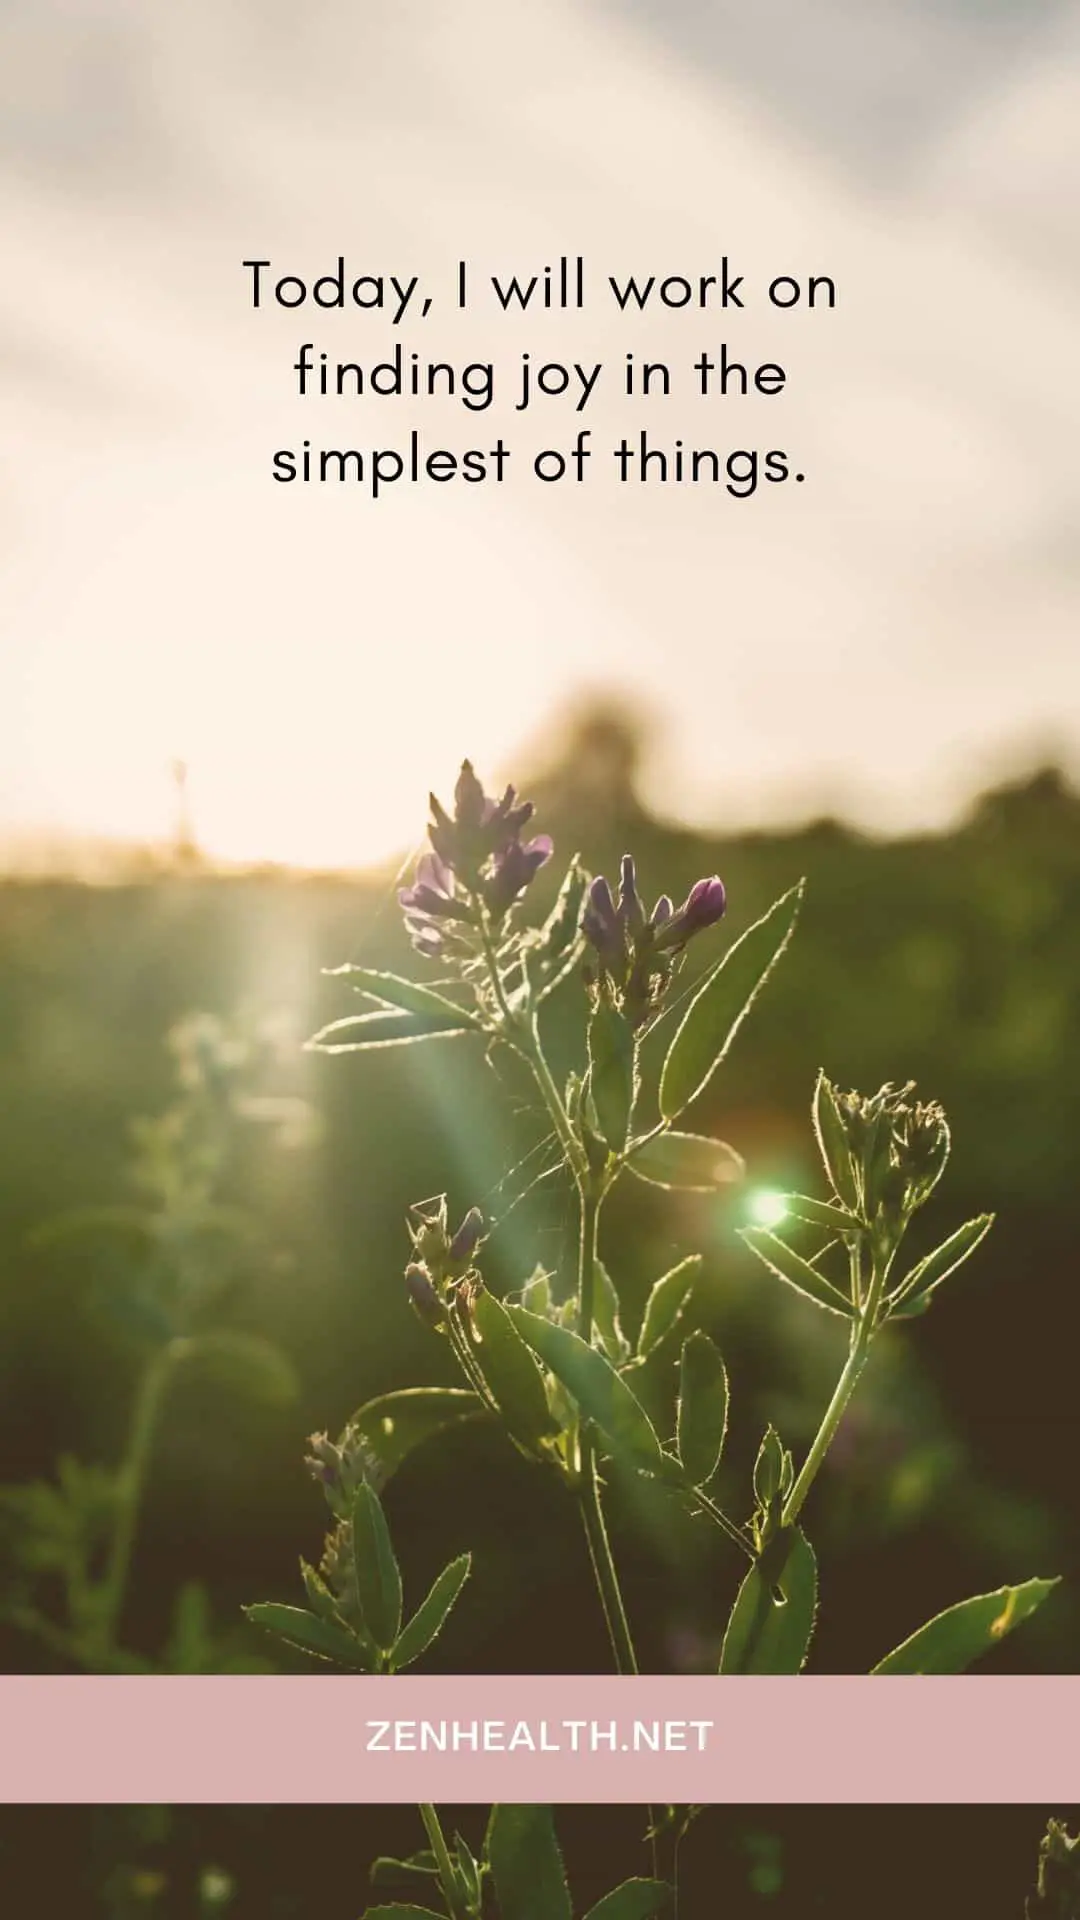 Short morning affirmations: today I will work on finding joy in the simplest of things